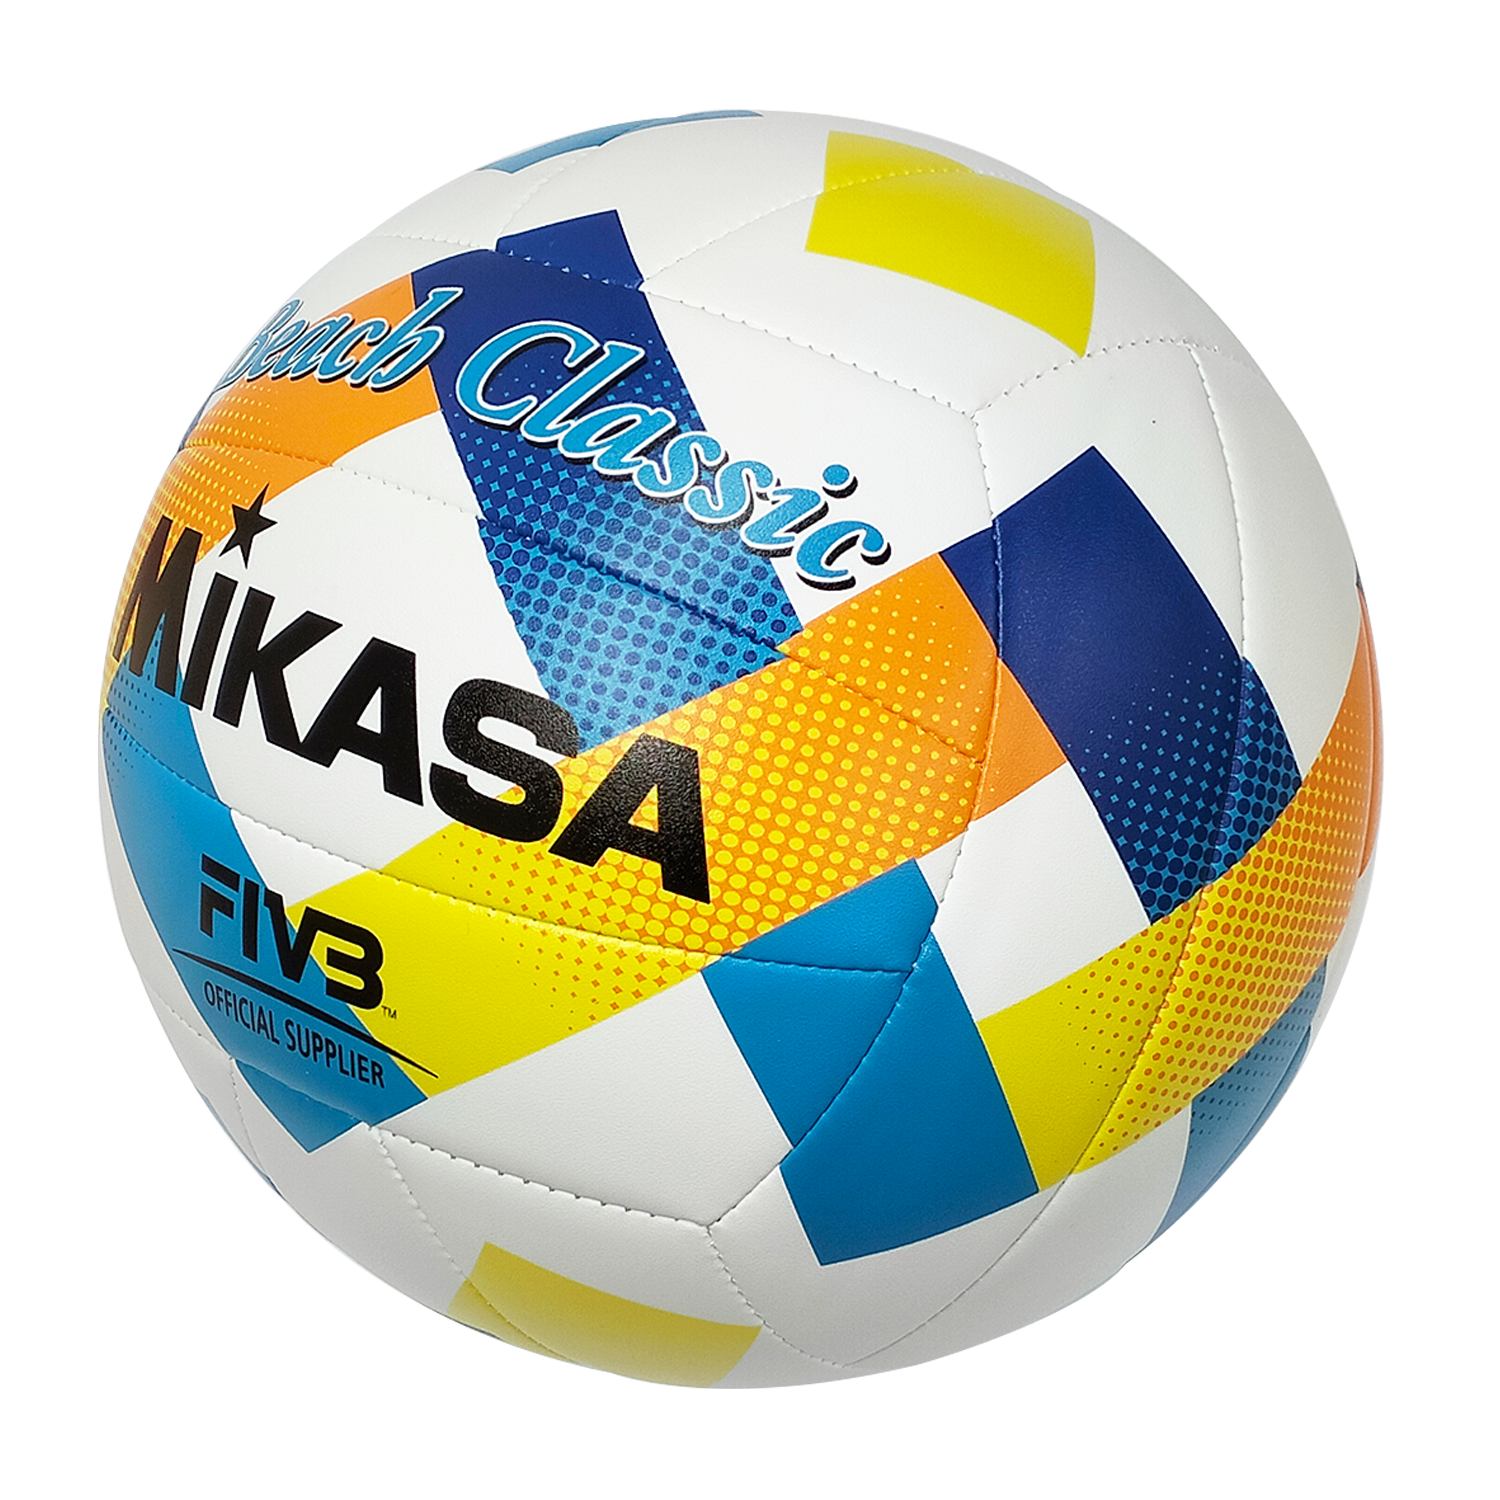 MIKASA BEACH VOLLEYBALL SOFT STITCHED COVER Y, , large image number null